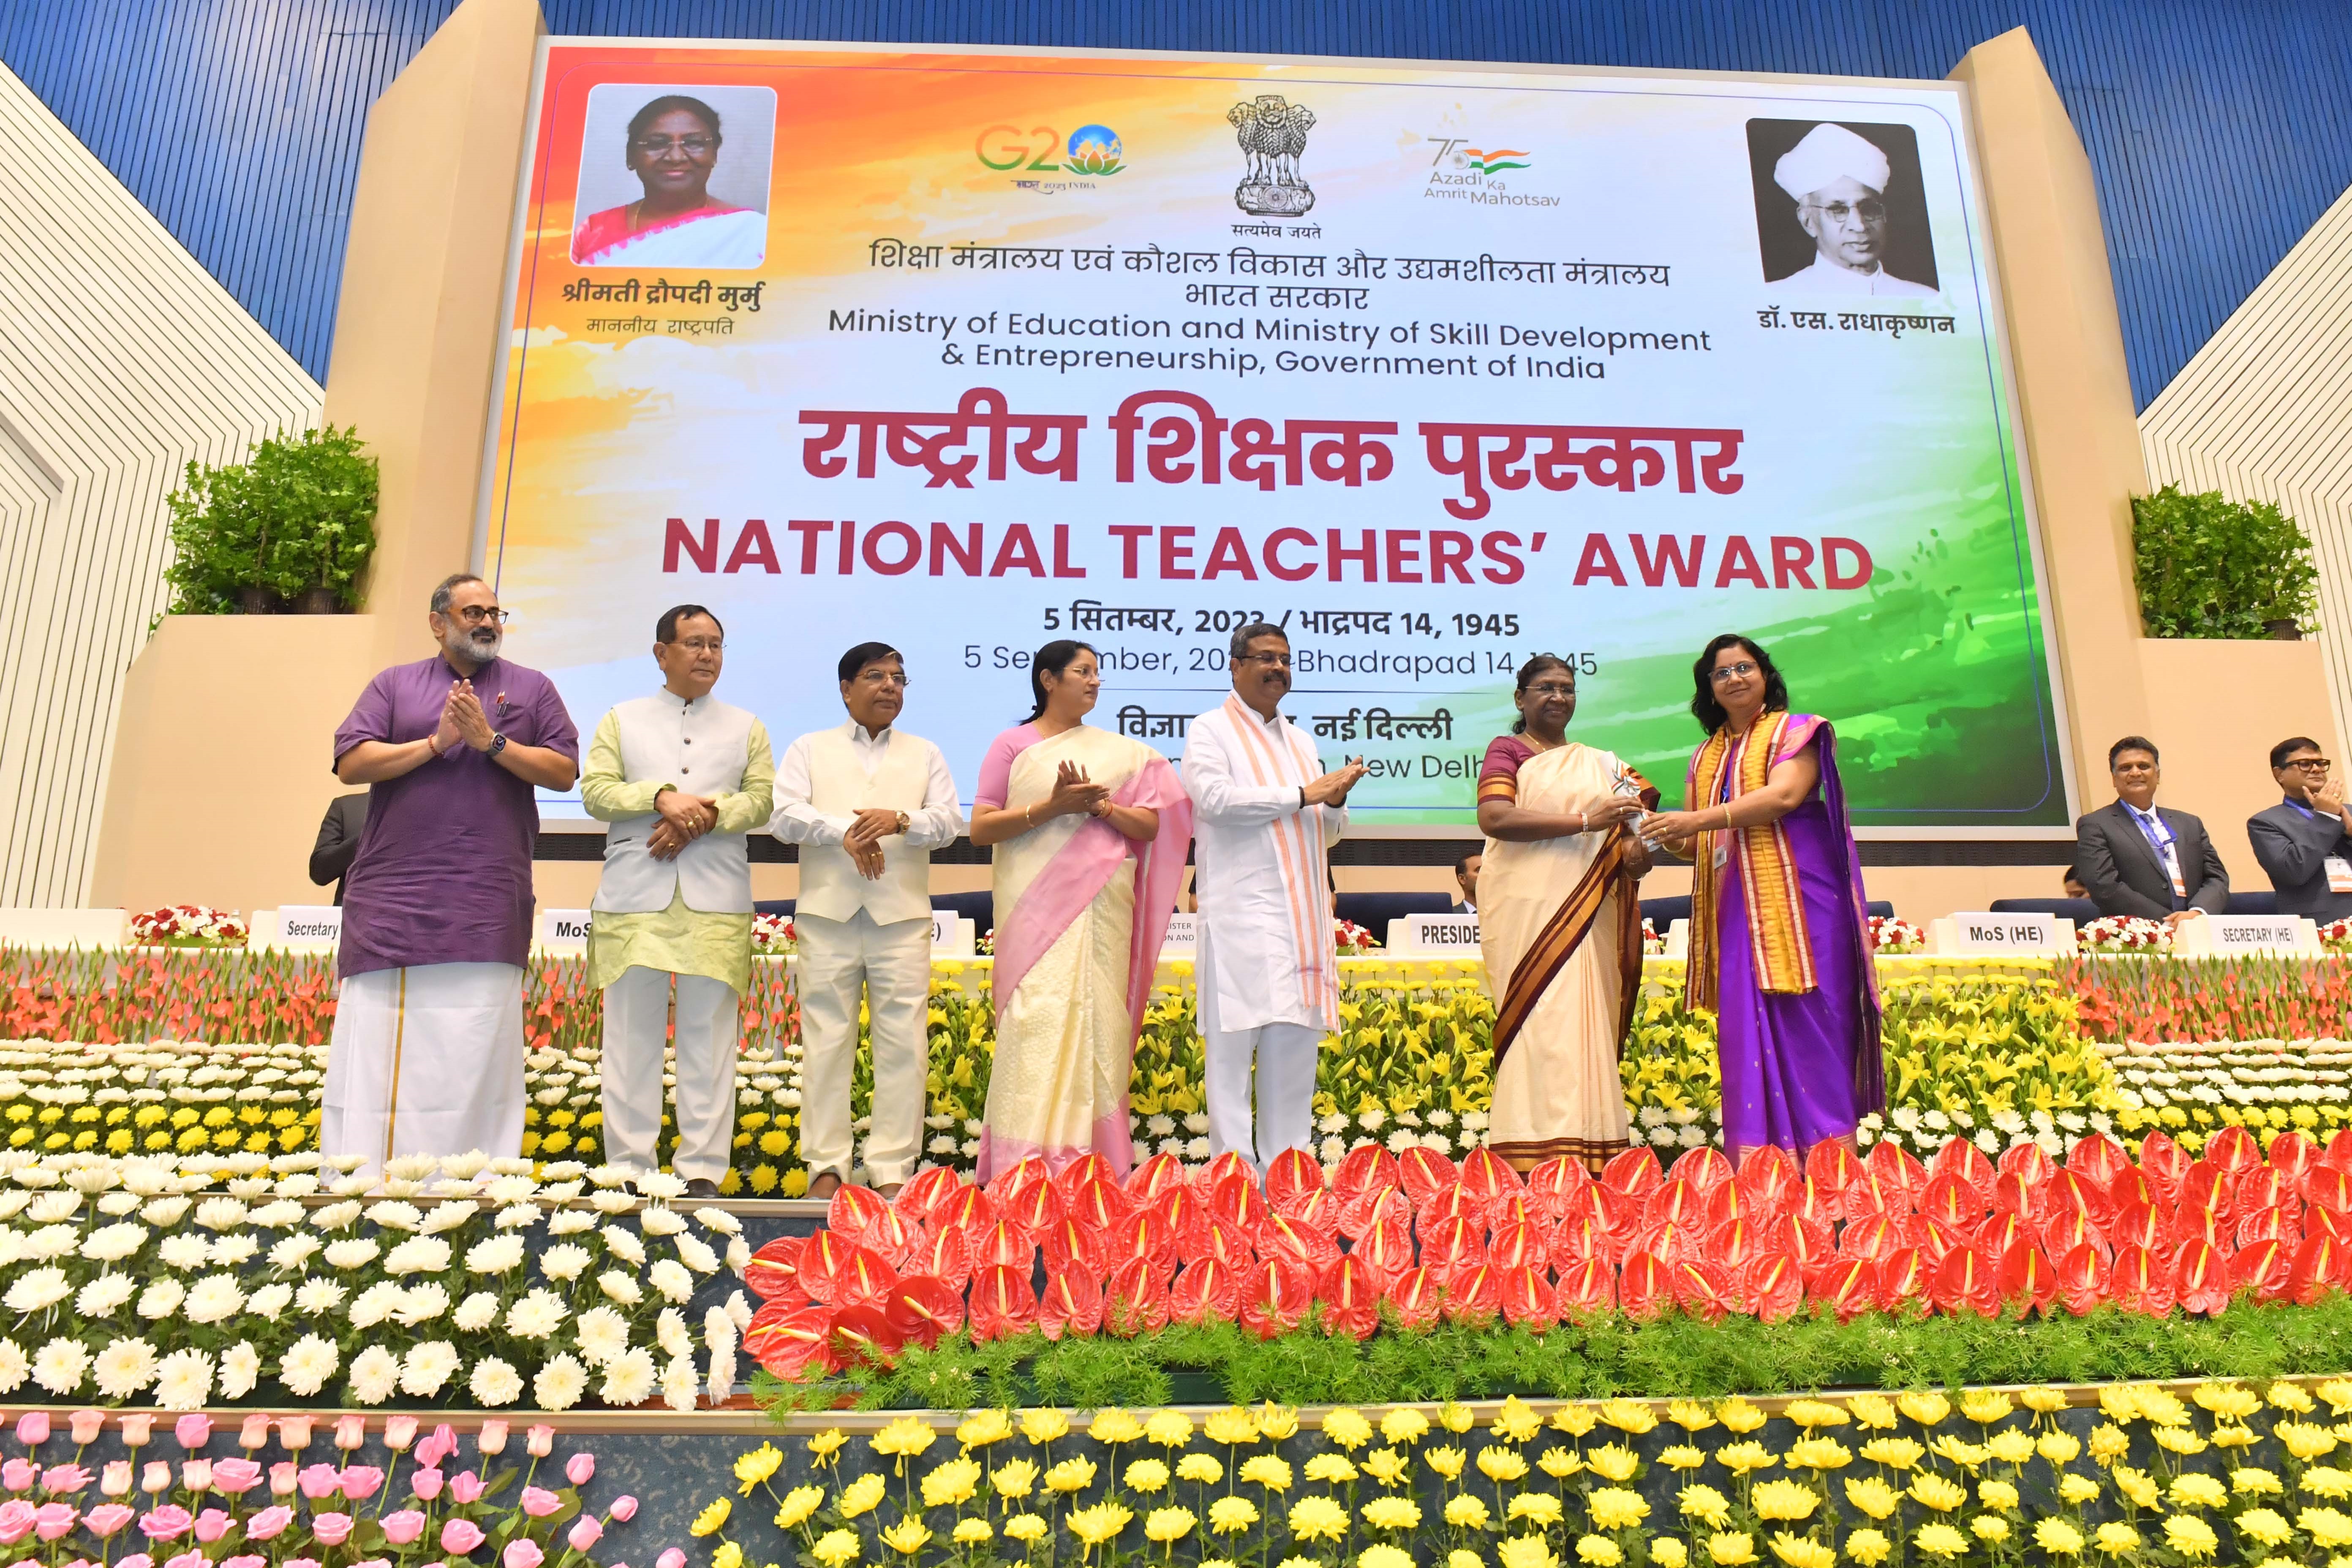 The President of India, Smt Droupadi Murmu conferred National Awards on  teachers from across the country at a function held at Vigyan Bhavan, New Delhi on September 5, 2023 on the occasion of Teachers’ Day.